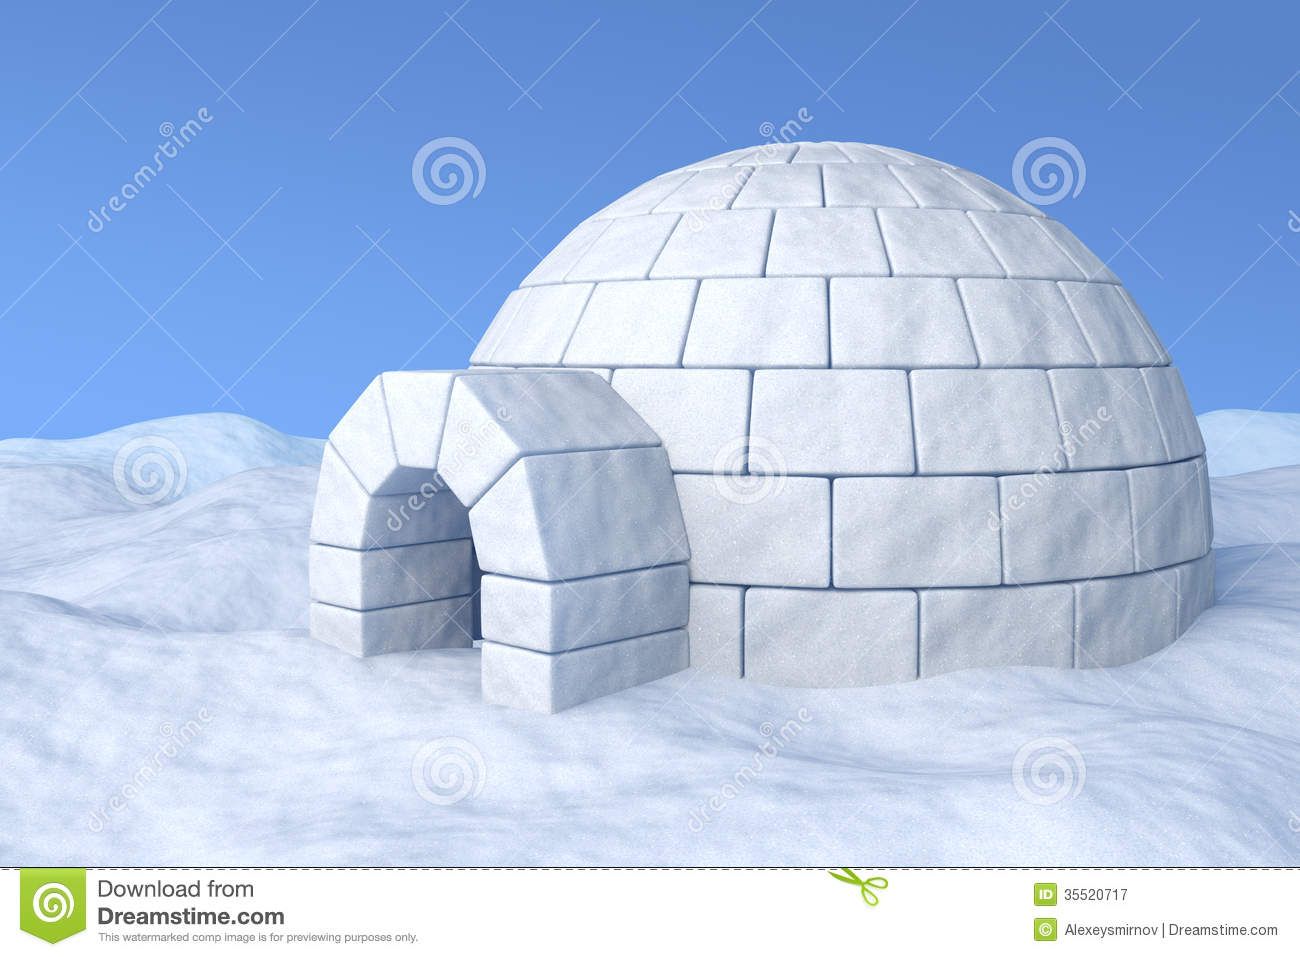 Detail Images Of Igloo House Nomer 11